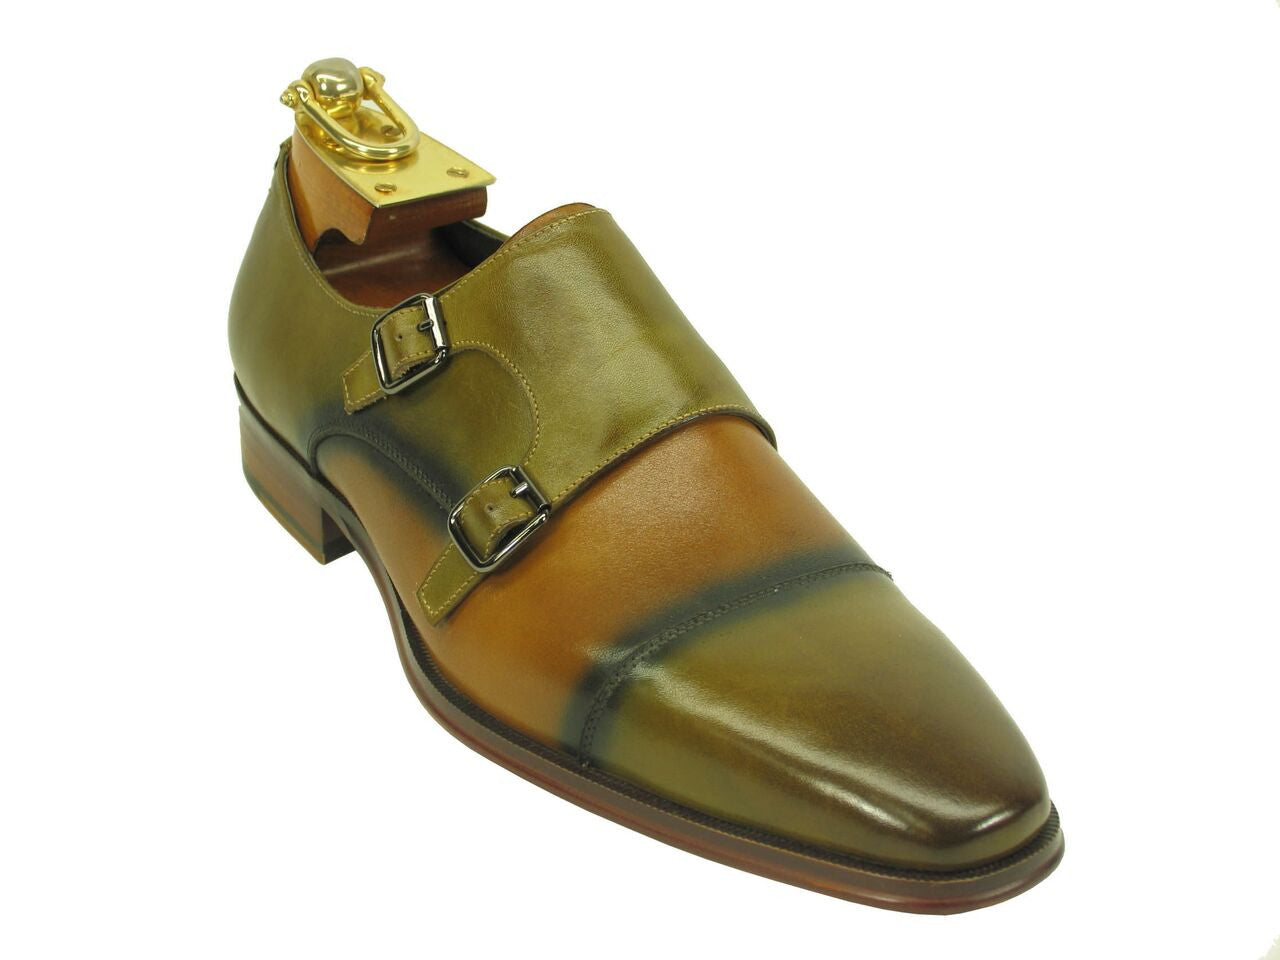 Two Tone Monk Strap Loafer